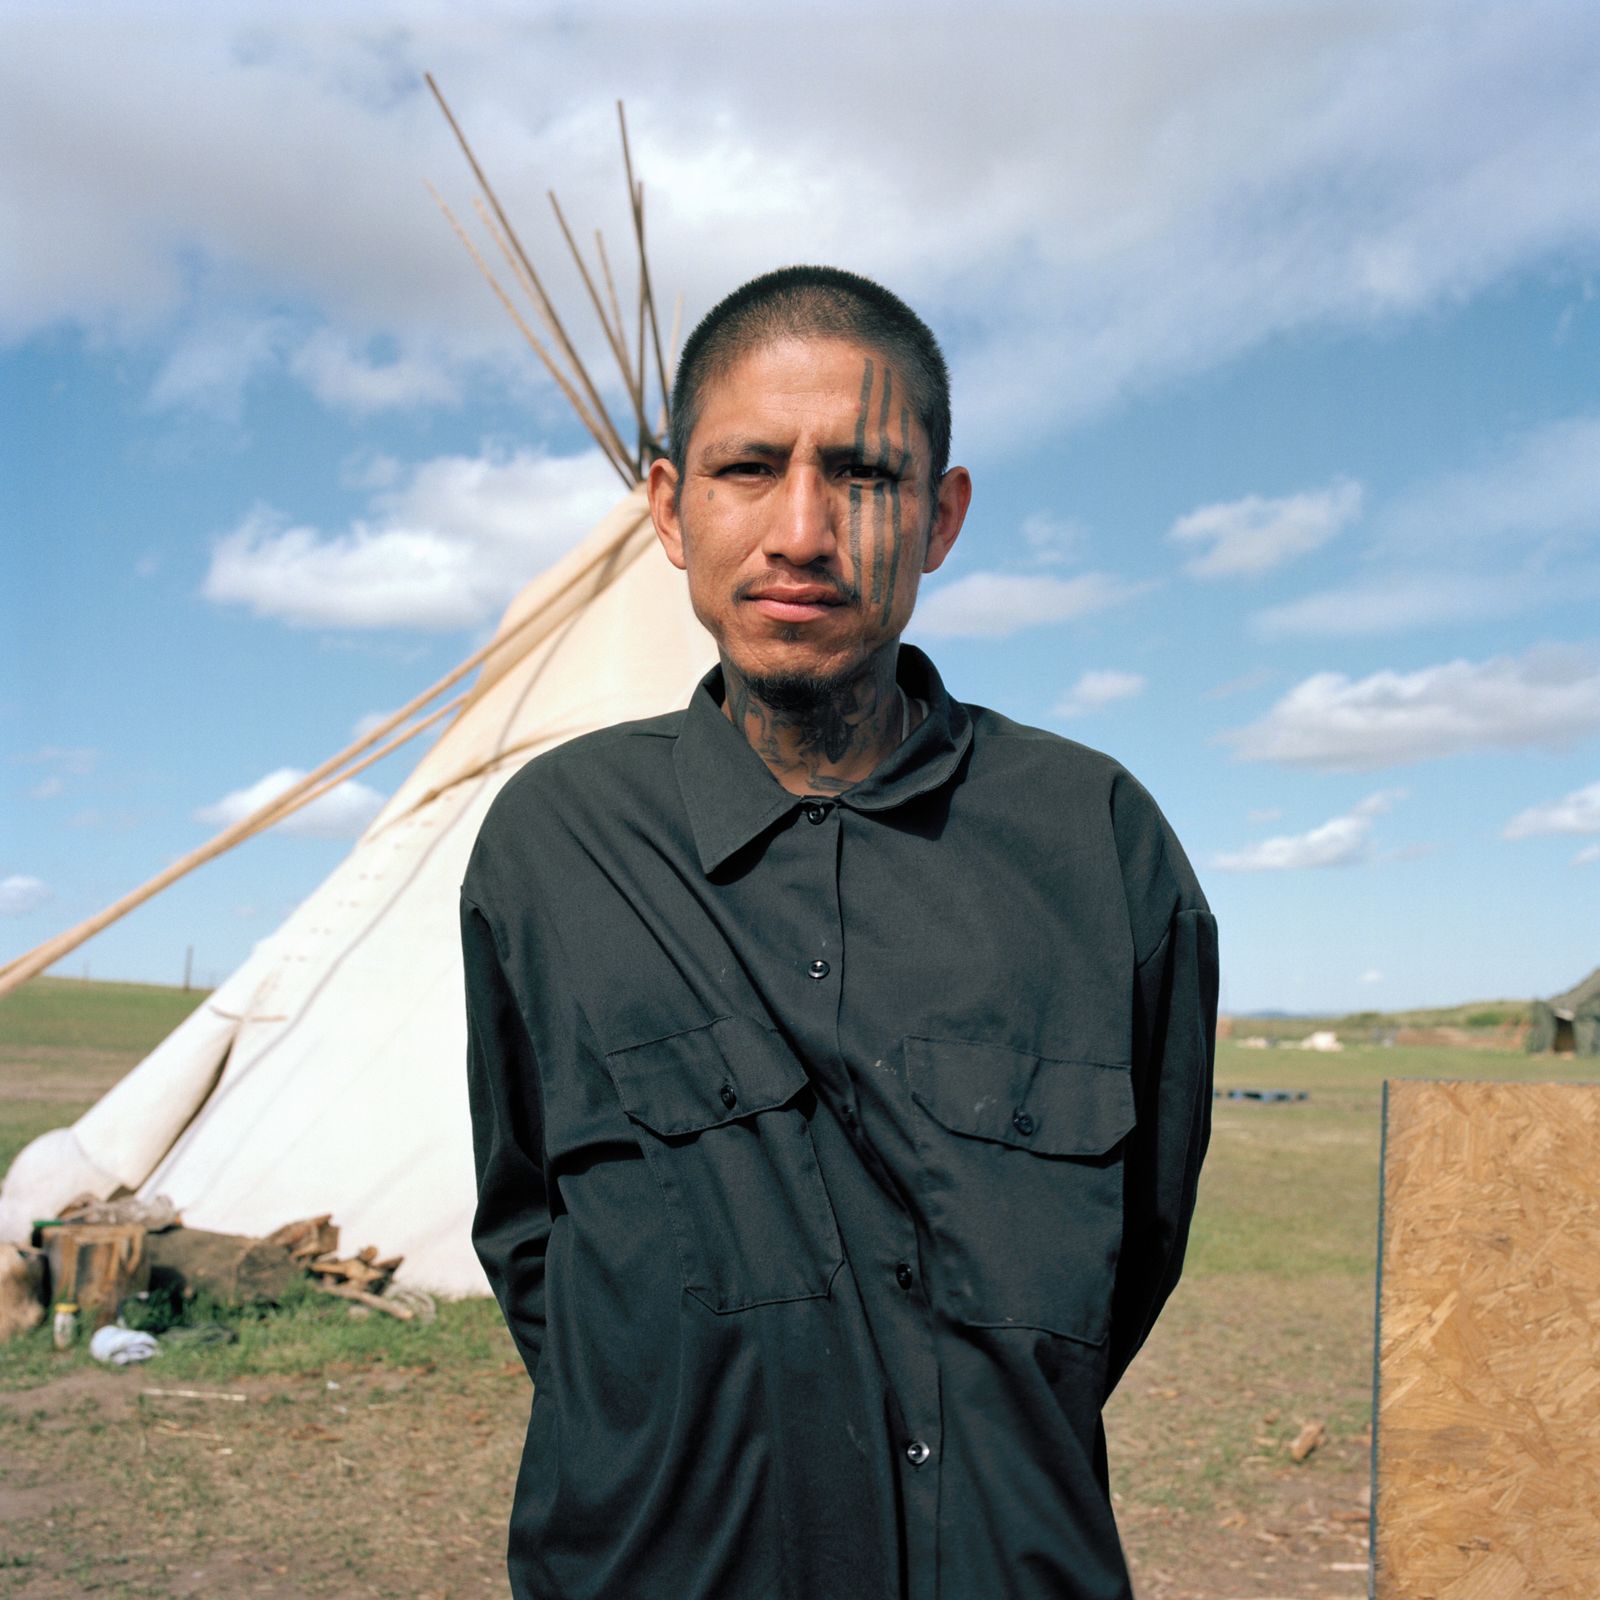 © Louise Amelie - "Chase" Native American named Chase Flying Horse from Standing Rock Sioux Tripe, Dakota.